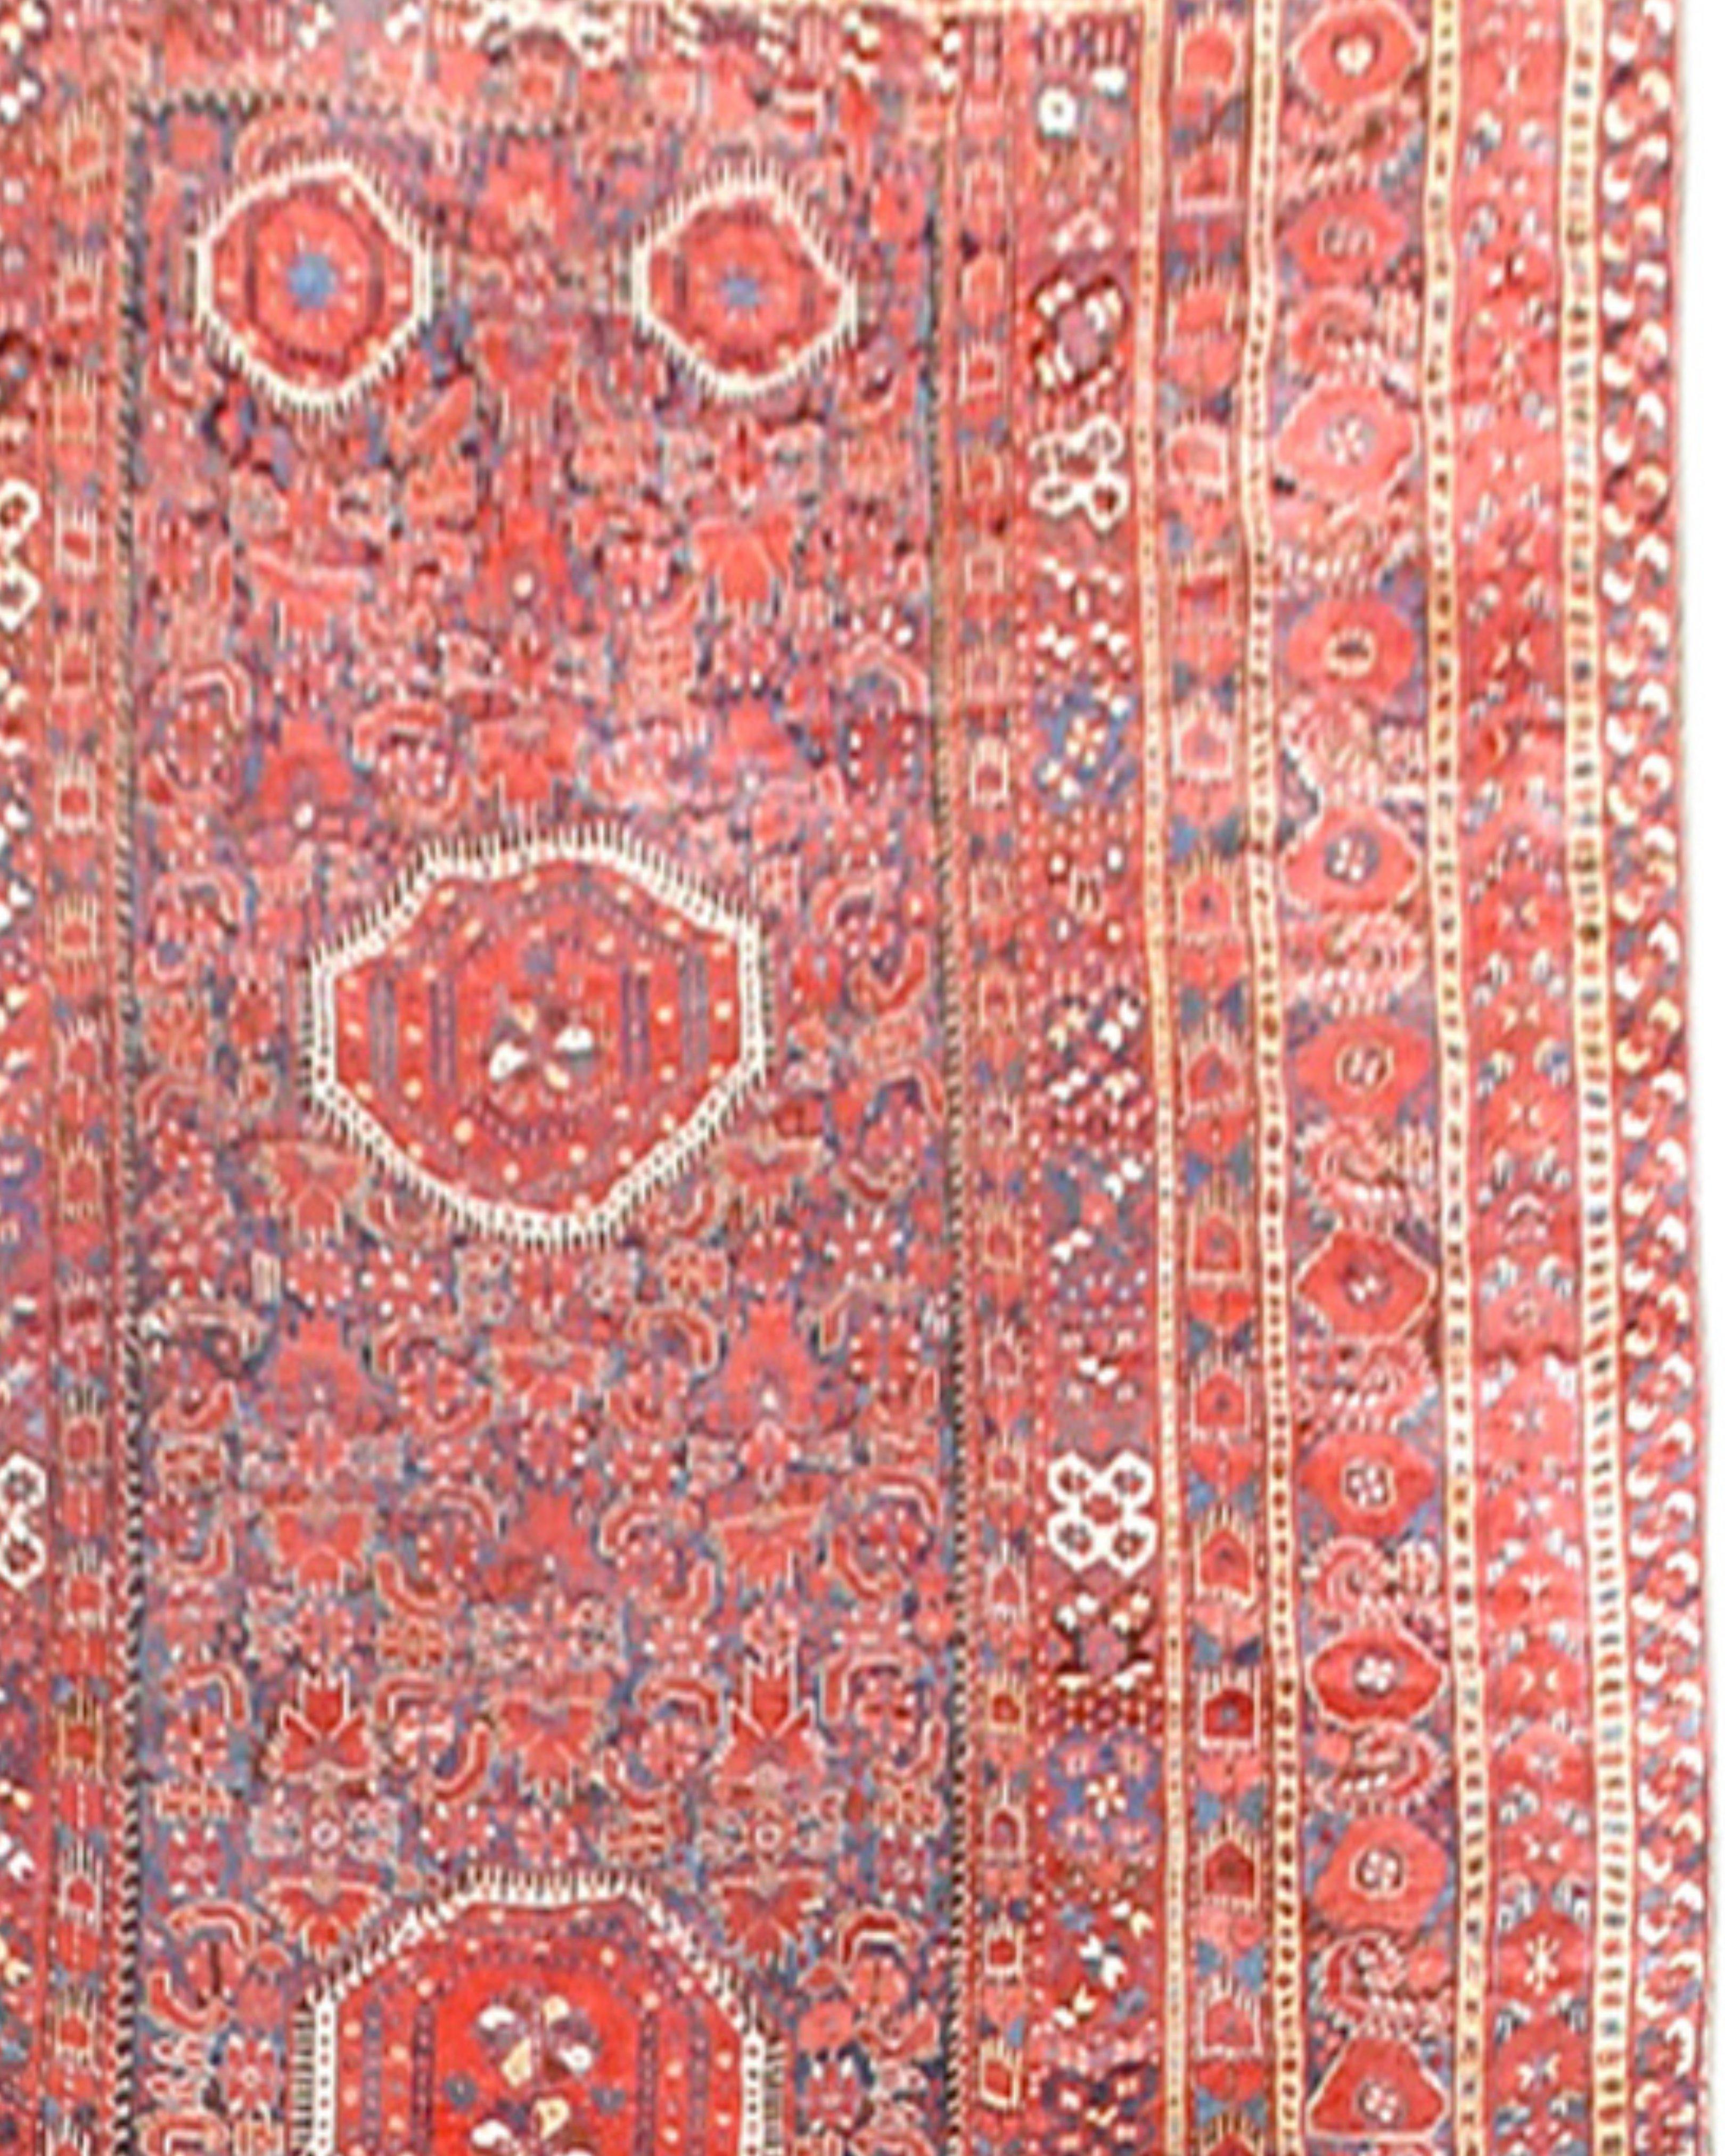 Antique Large Uzbek Bashir Rug, 19th Century

This long main carpet was woven in one of several possible oasis towns along the Oxus River of Central Asia in what is now Uzbekistan. During the second half of the nineteenth century, Turkmen weavers